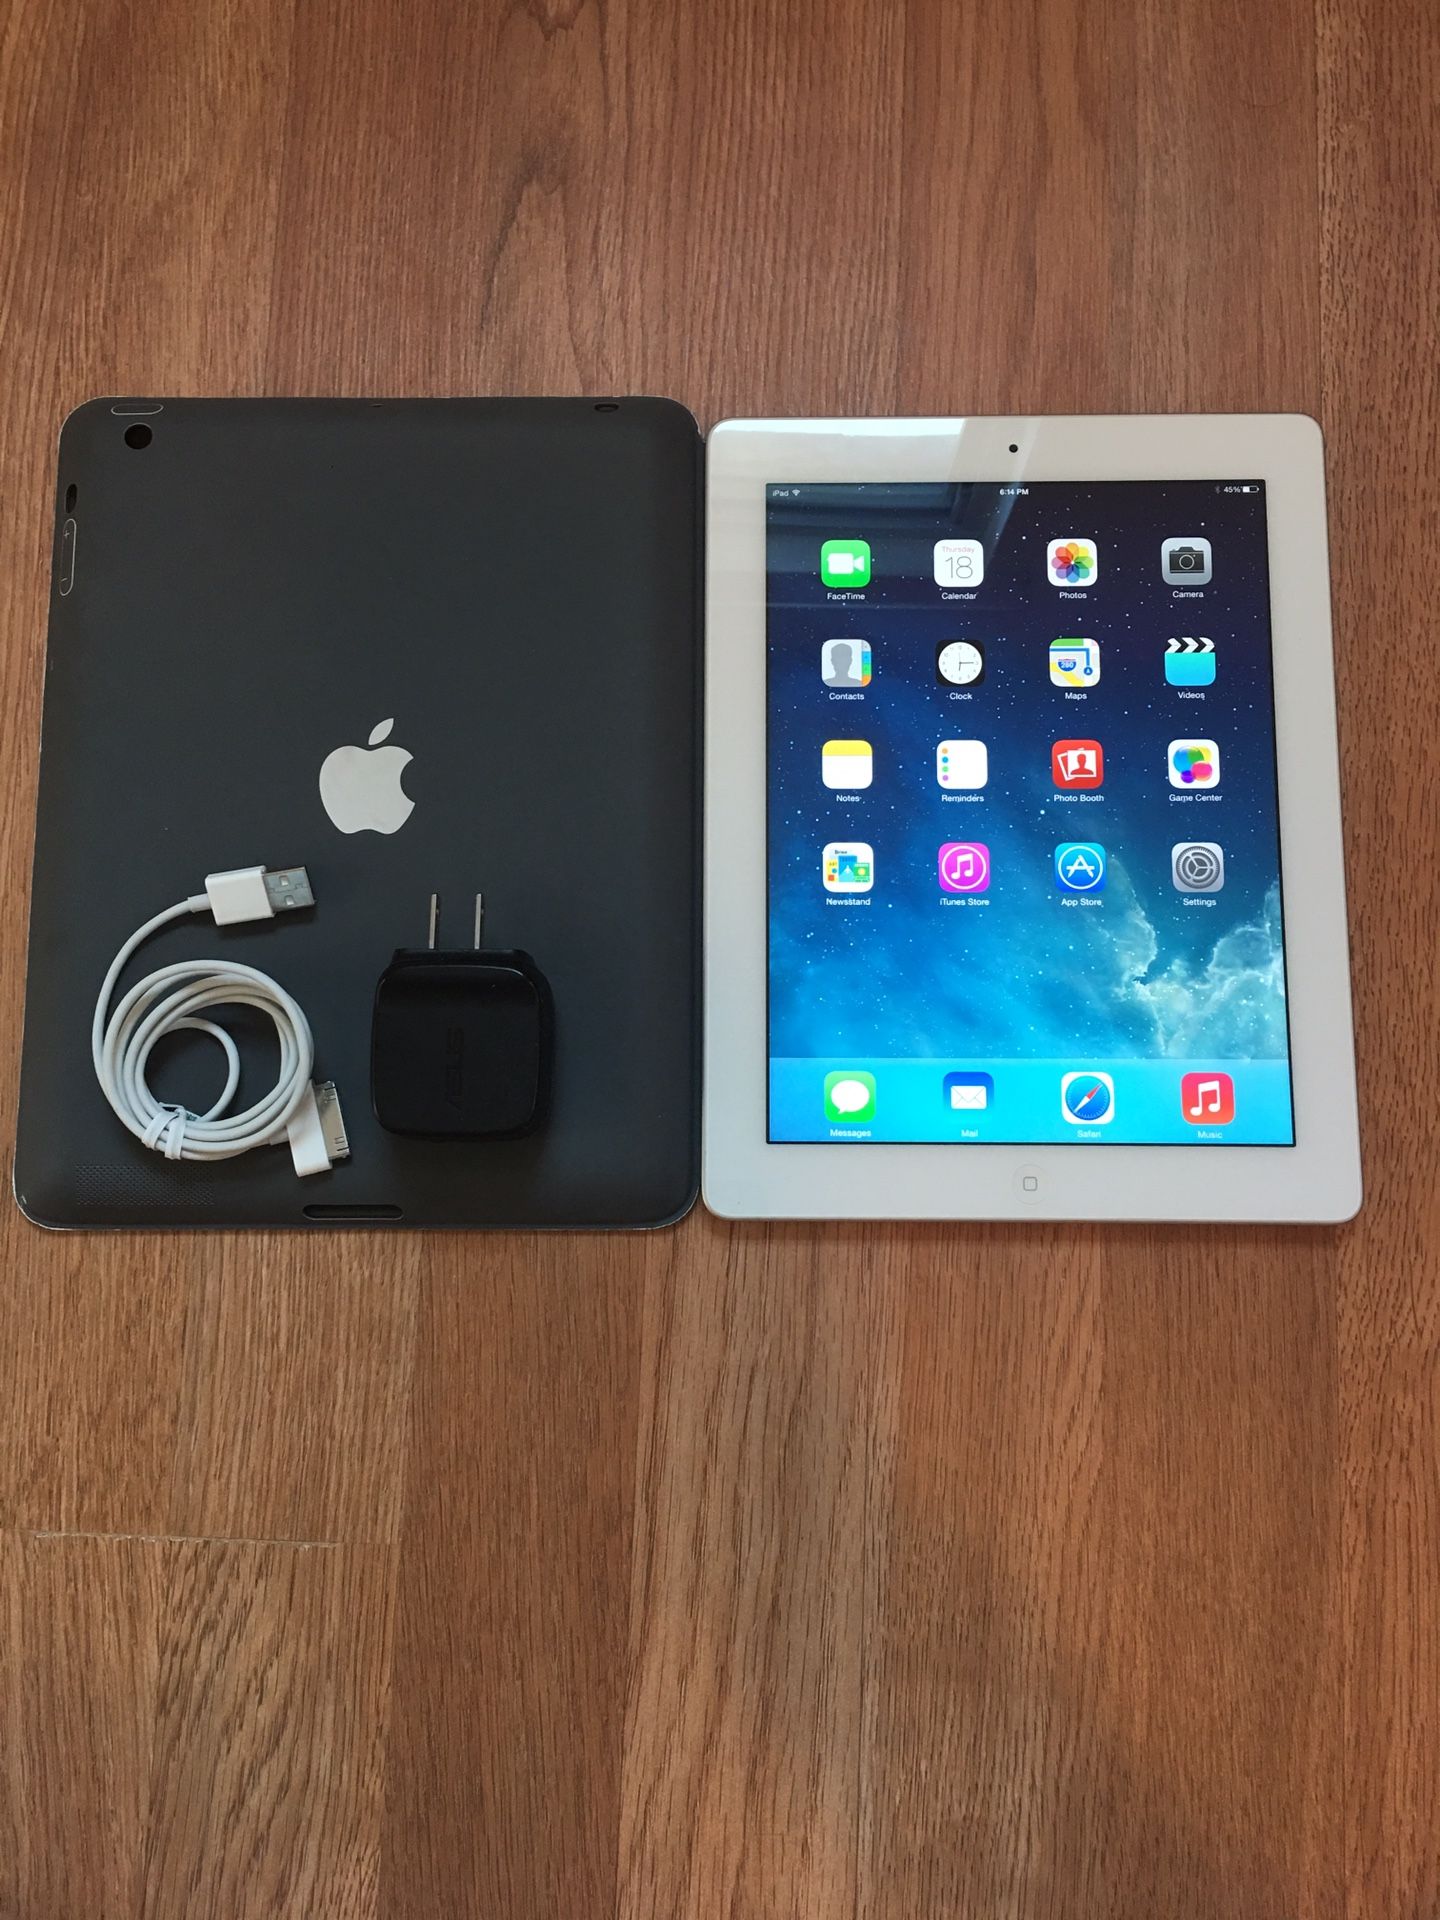 iPad 3, 64GB, WiFi - Bundles with Apple Smart Case and Charger